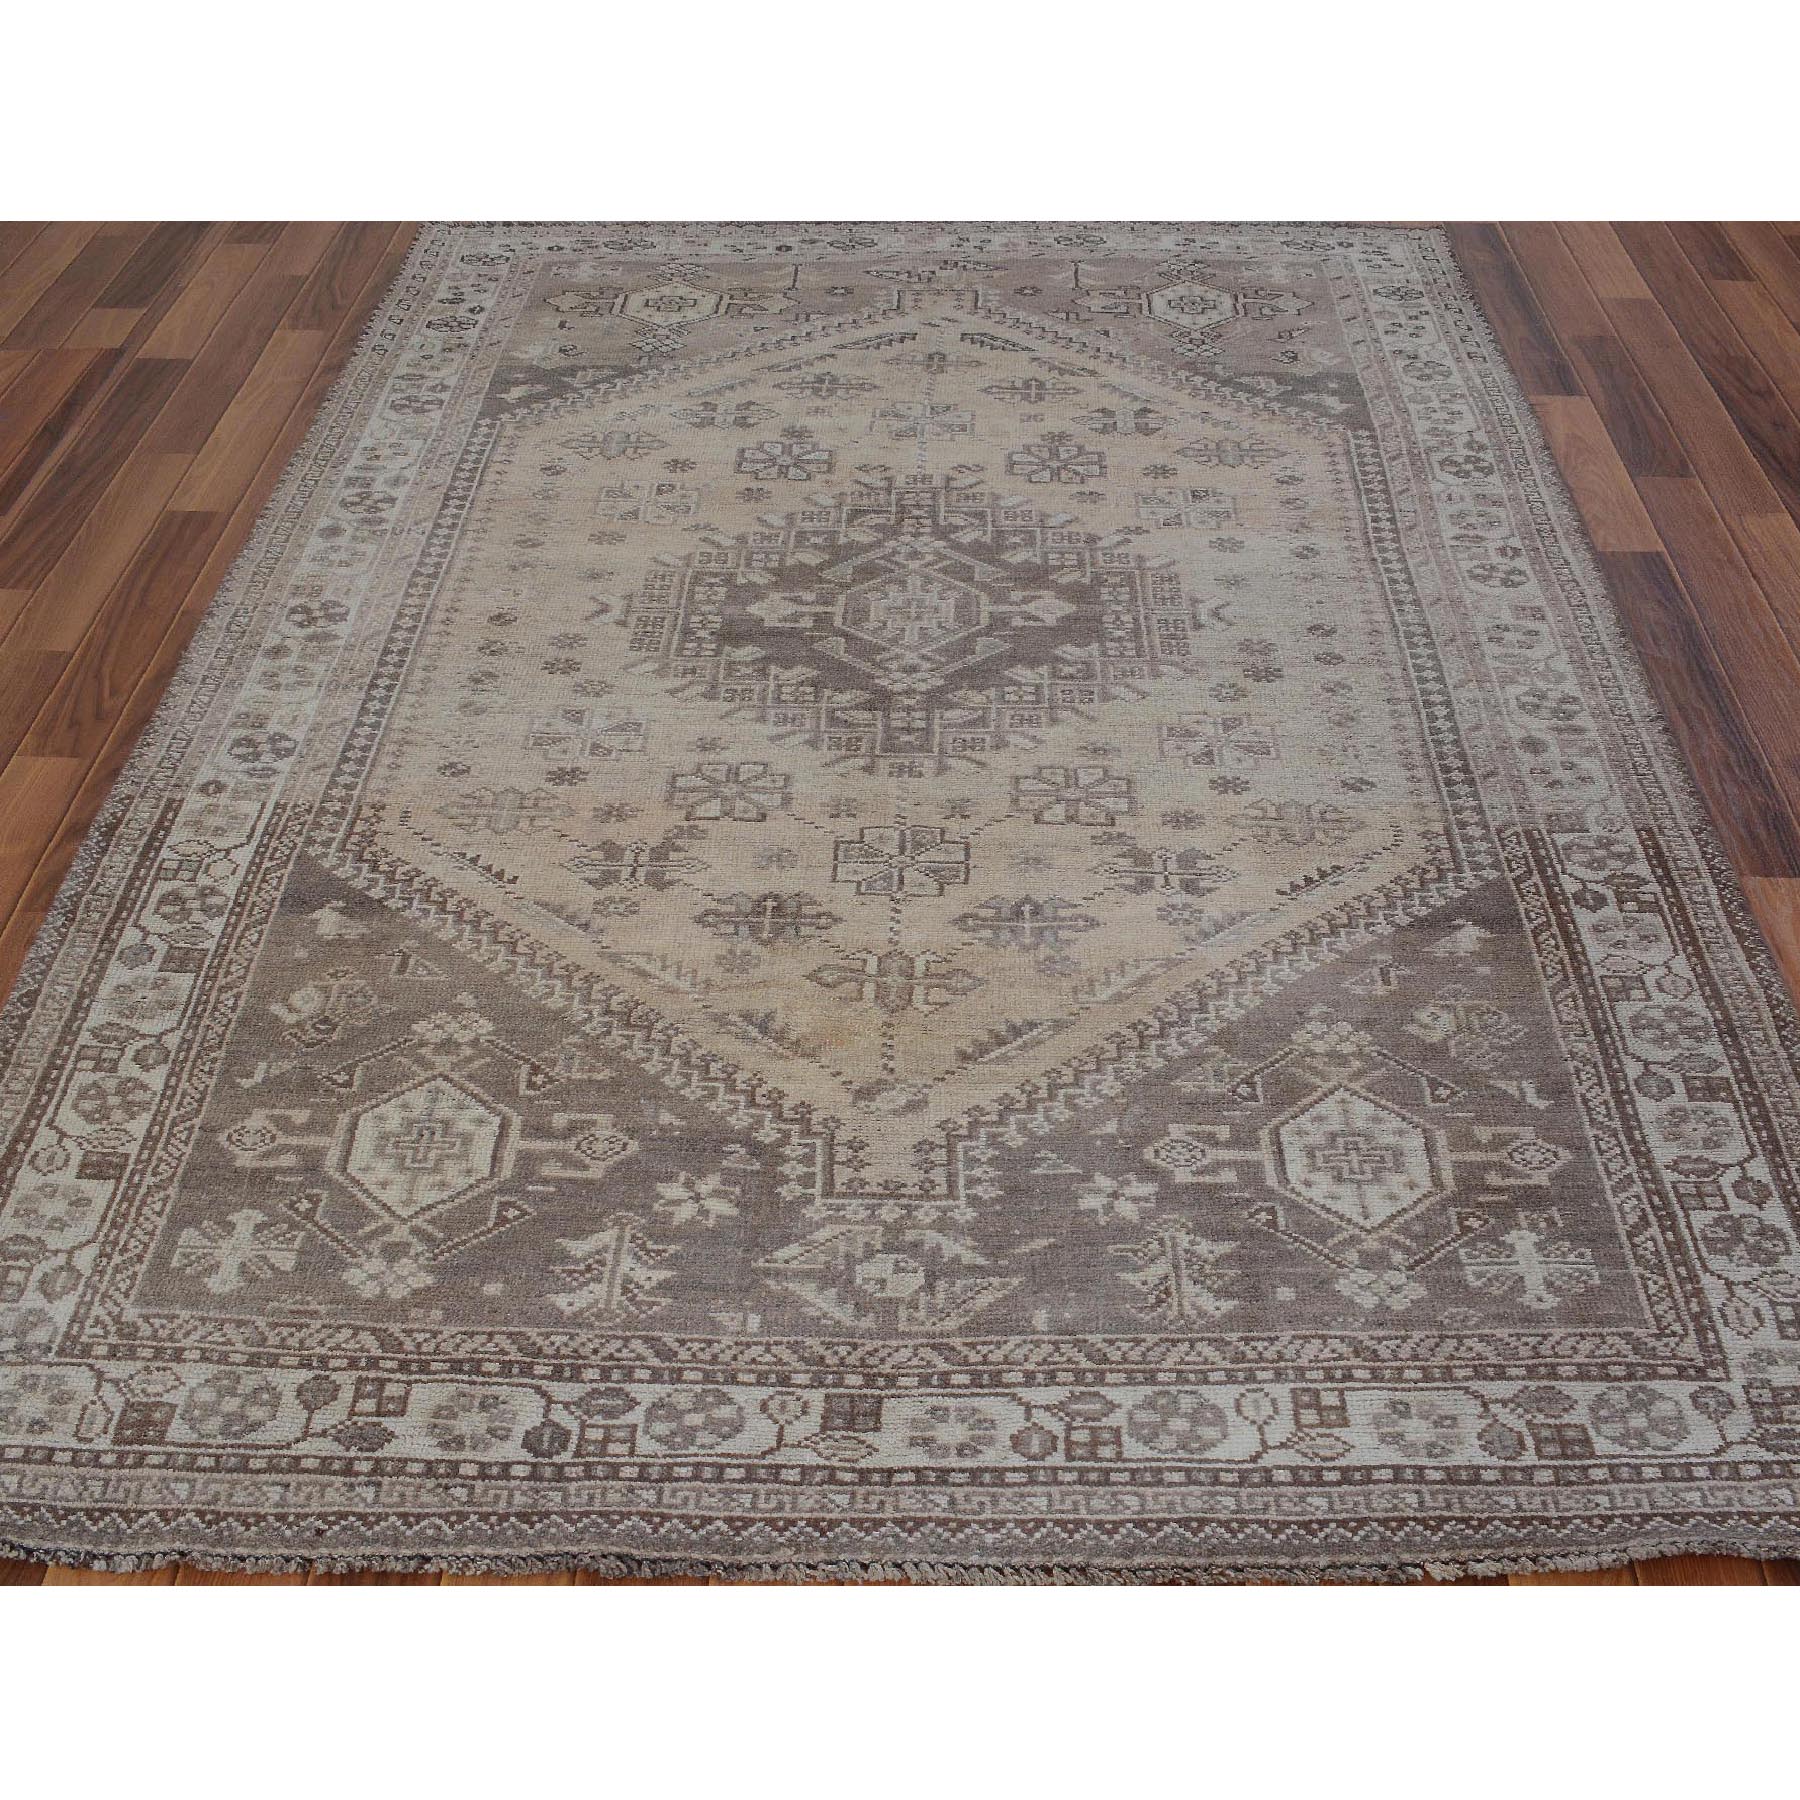 5-4 x8-1  Beige Worn Down And Old Persian Qashqai Pure Wool Hand Knotted Oriental Rug 